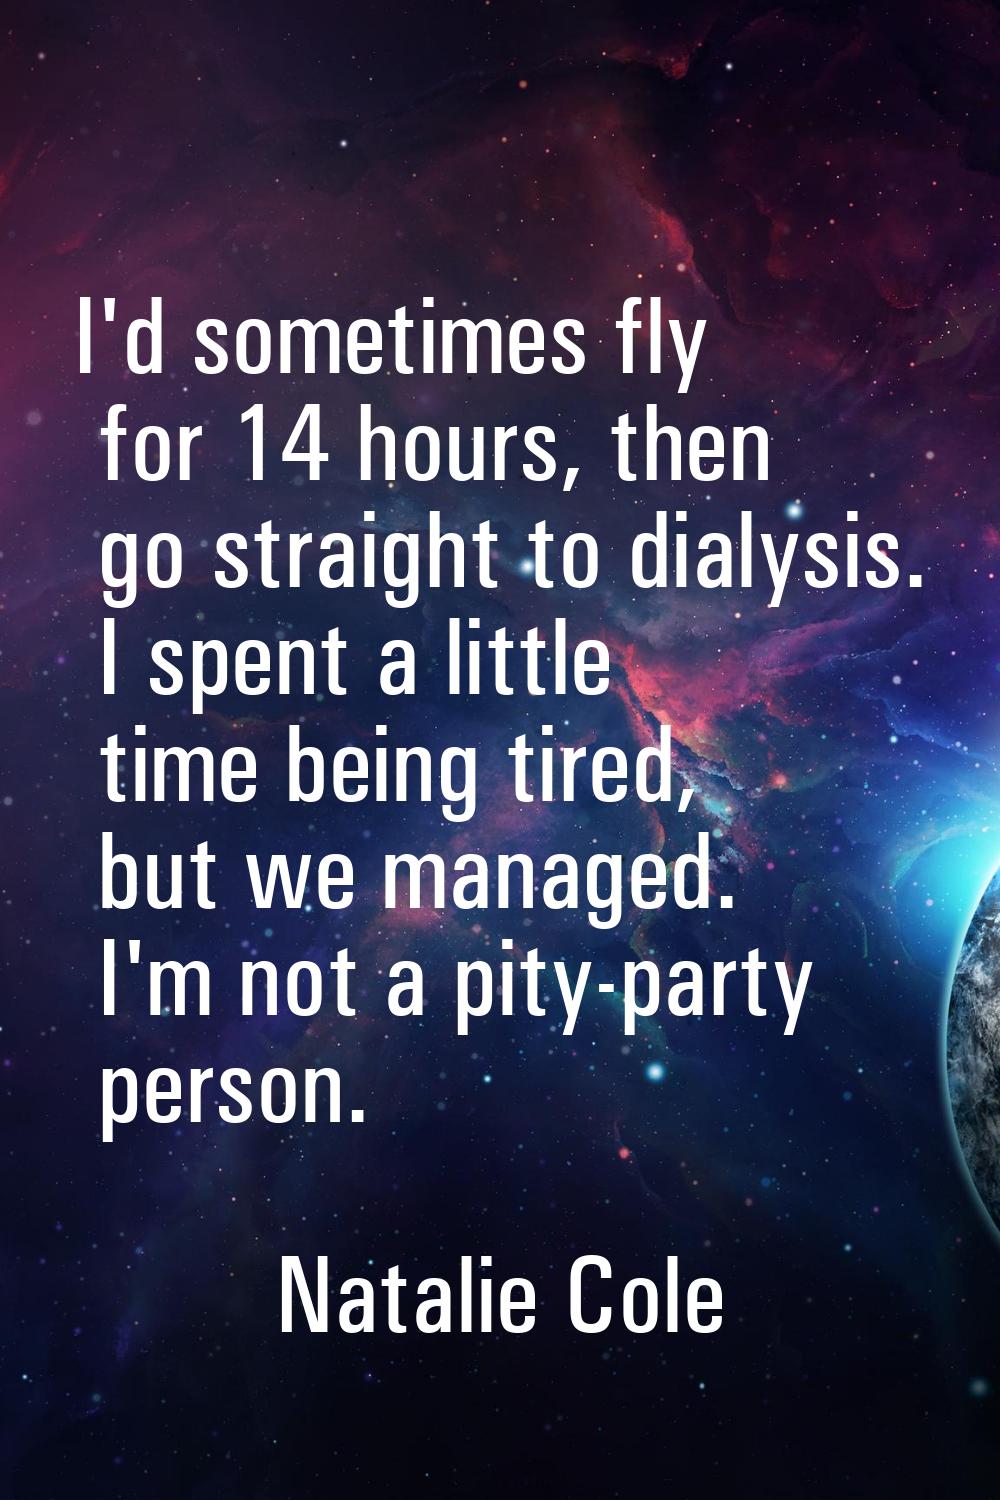 I'd sometimes fly for 14 hours, then go straight to dialysis. I spent a little time being tired, bu